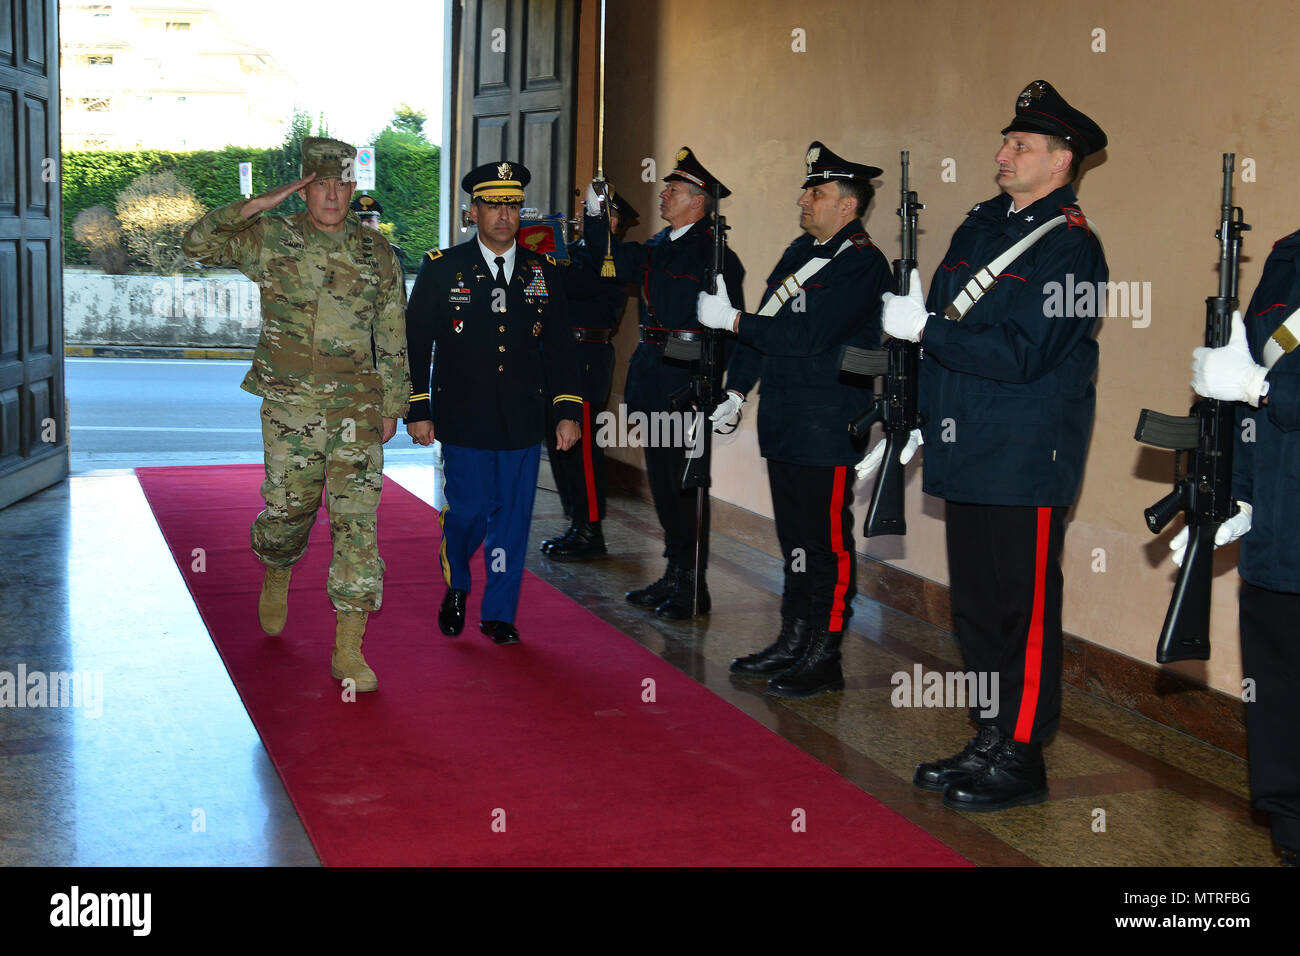 Lt. Gen. Charles D. Luckey (left), Commanding General U.S. Army Reserve Command, U.S. Army Col. Darius S. Gallegos (center), CoESPU deputy director, browse the Italian Carabinieri honor guard during visit at Center of Excellence for Stability Police Units (CoESPU) Vicenza, Italy, January 20, 2017.(U.S. Army Photo by Visual Information Specialist Paolo Bovo/released) Stock Photo